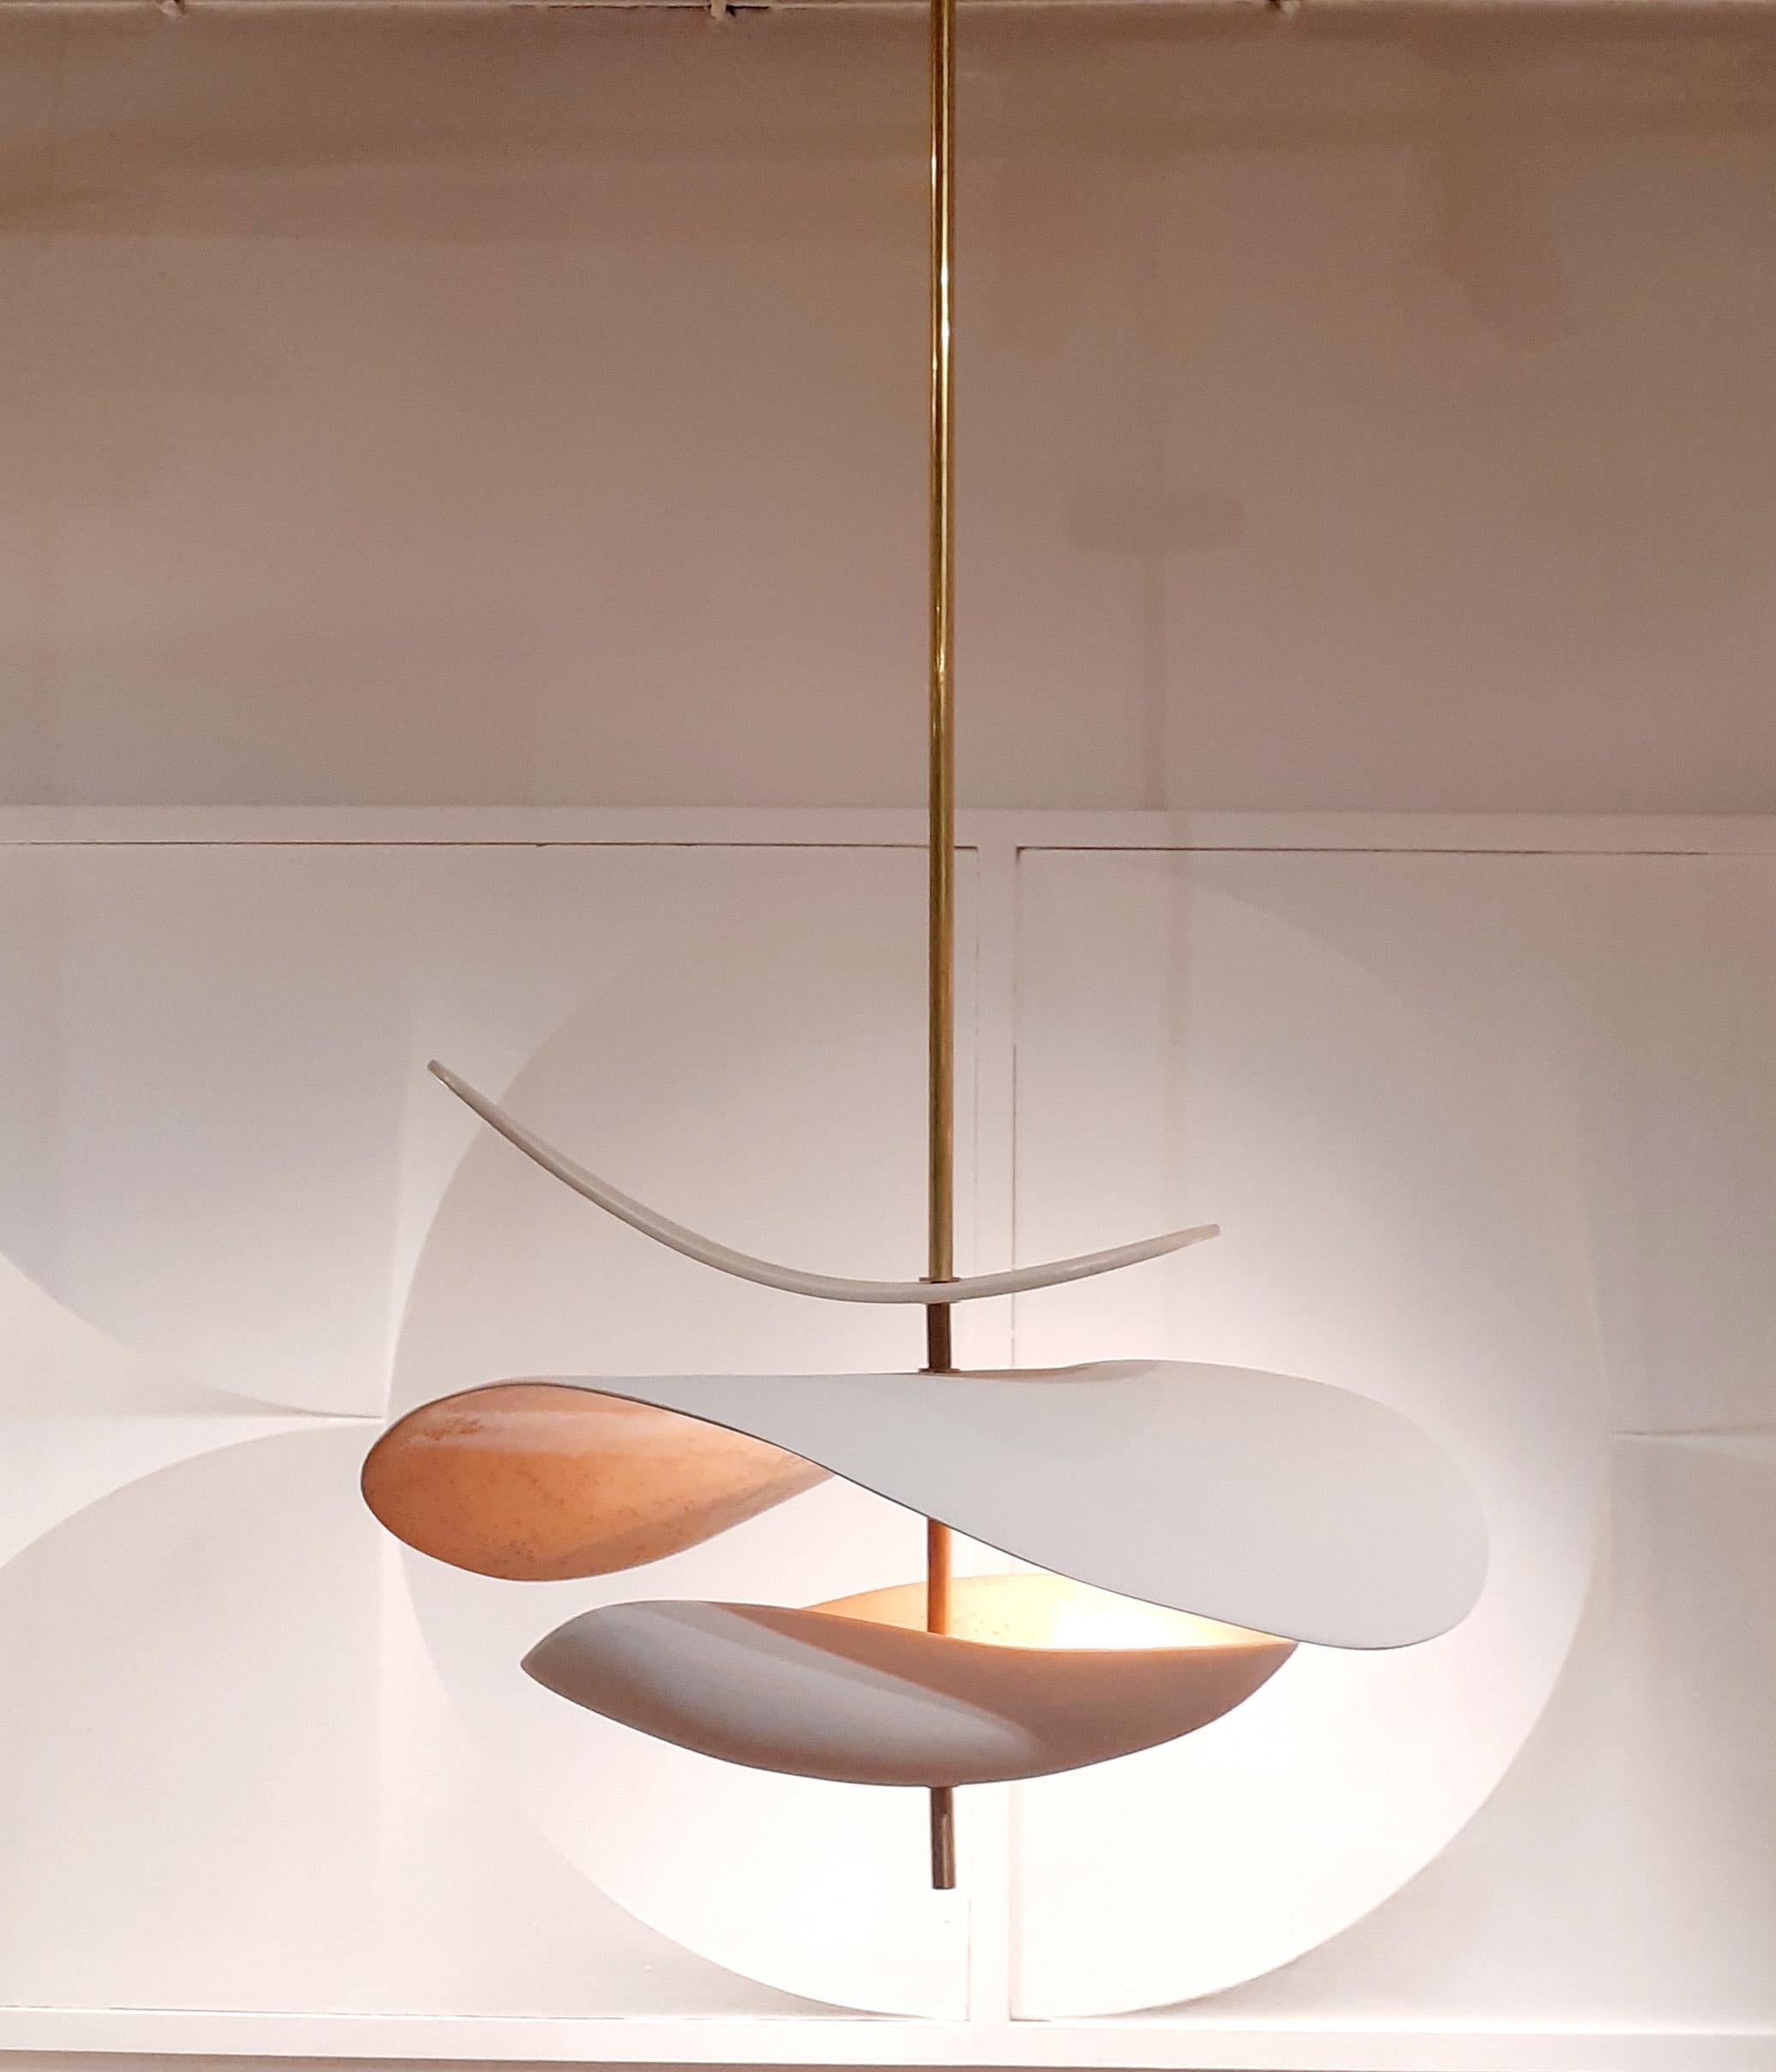 Sculptural ceramic suspension.
Poetic and organic design handmade by Elsa Foulon Studio in her Parisian workshop.
Enameled ceramic, brass structure.
Two heights available : 43,3 Inch or 53,15 Inch. Also, we can adjust the height to your